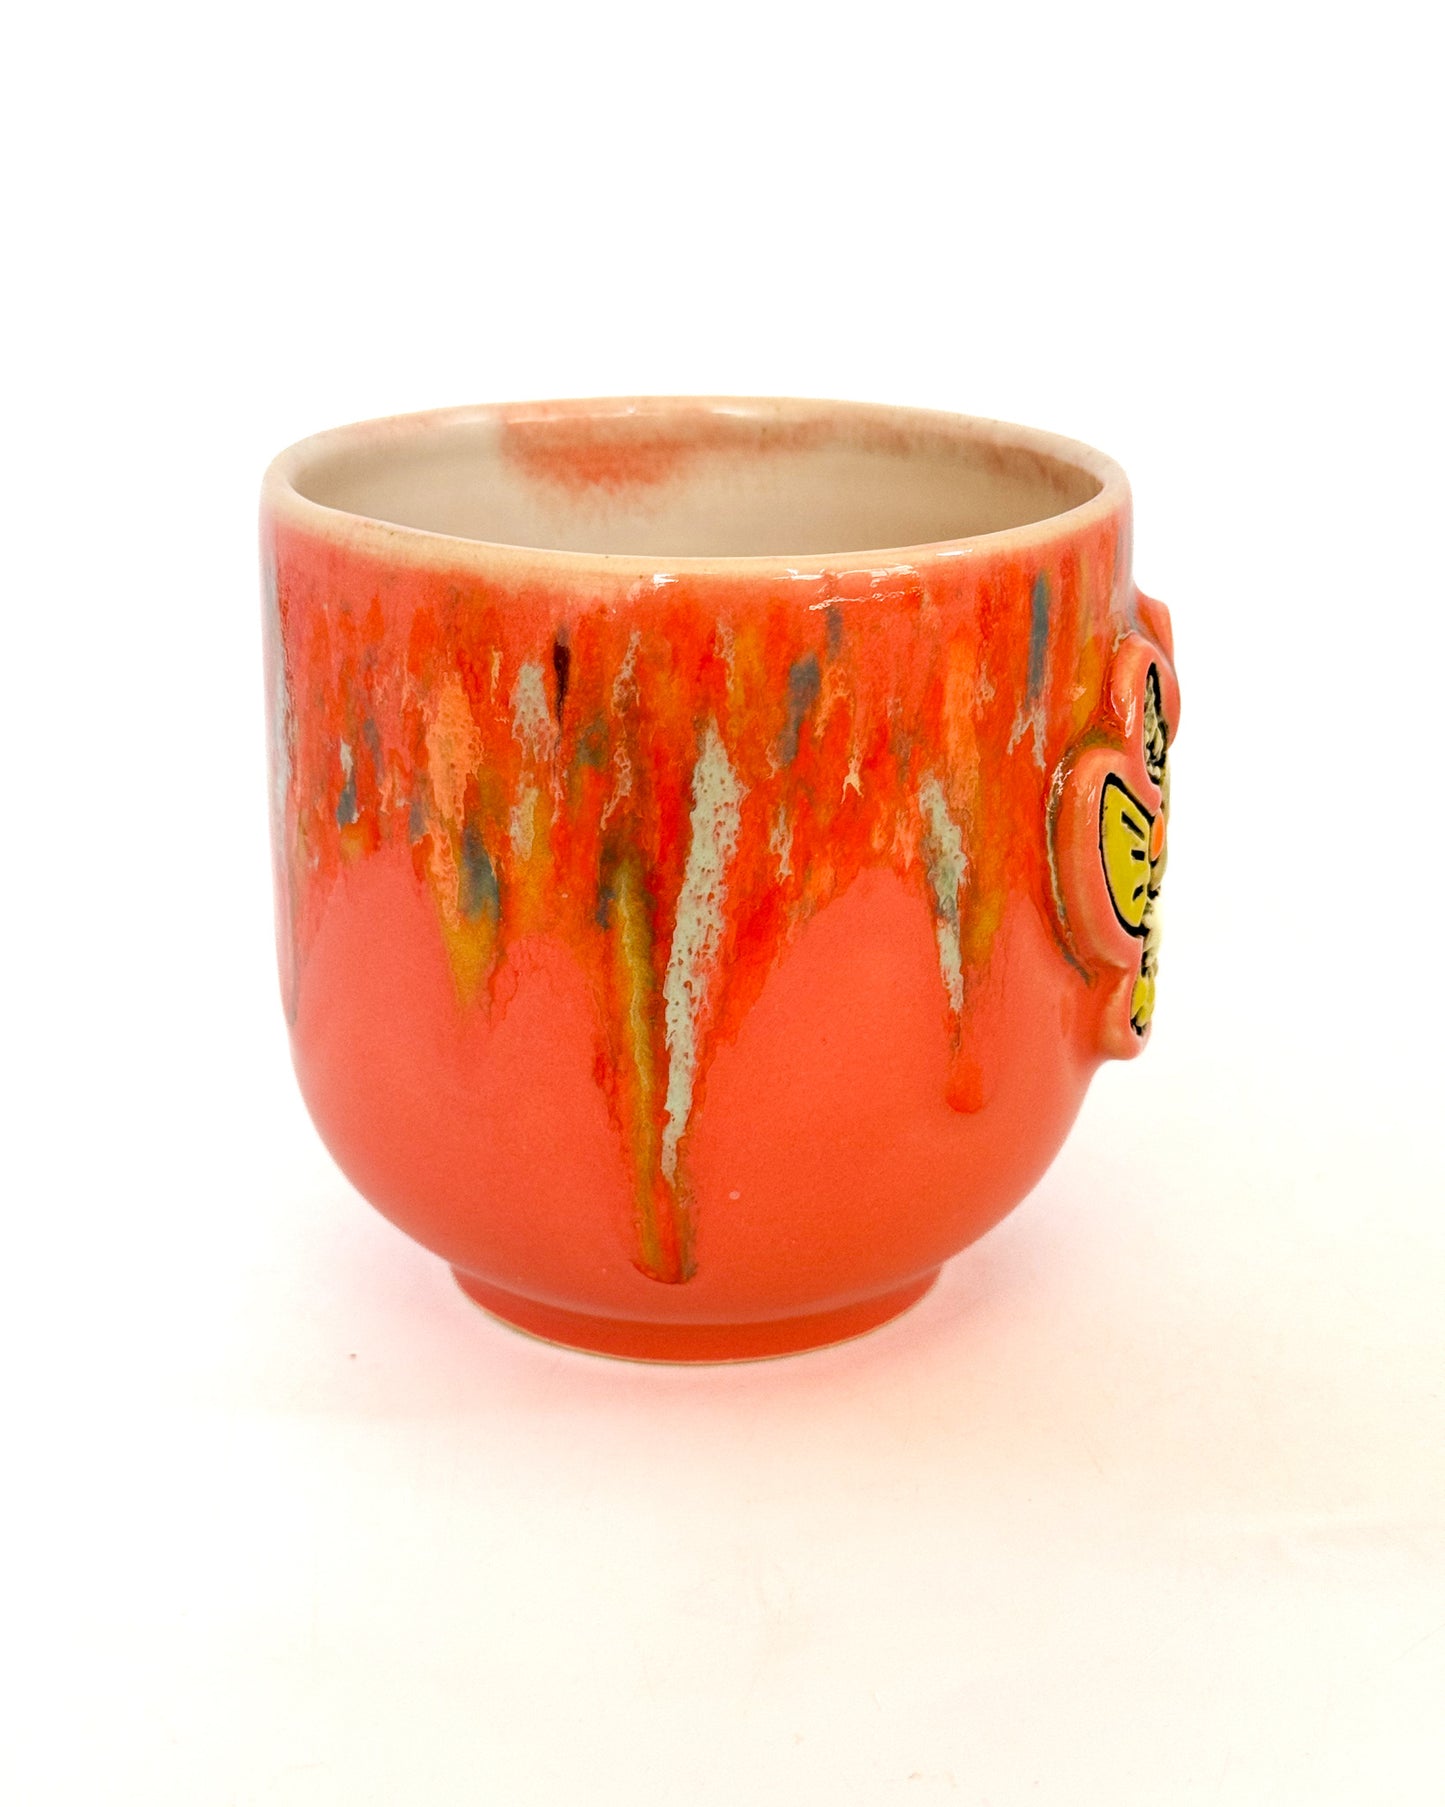 Cryptid Cutie Mug with Sherbert Drips | Flying Mothman with Pink Exterior | SECONDS